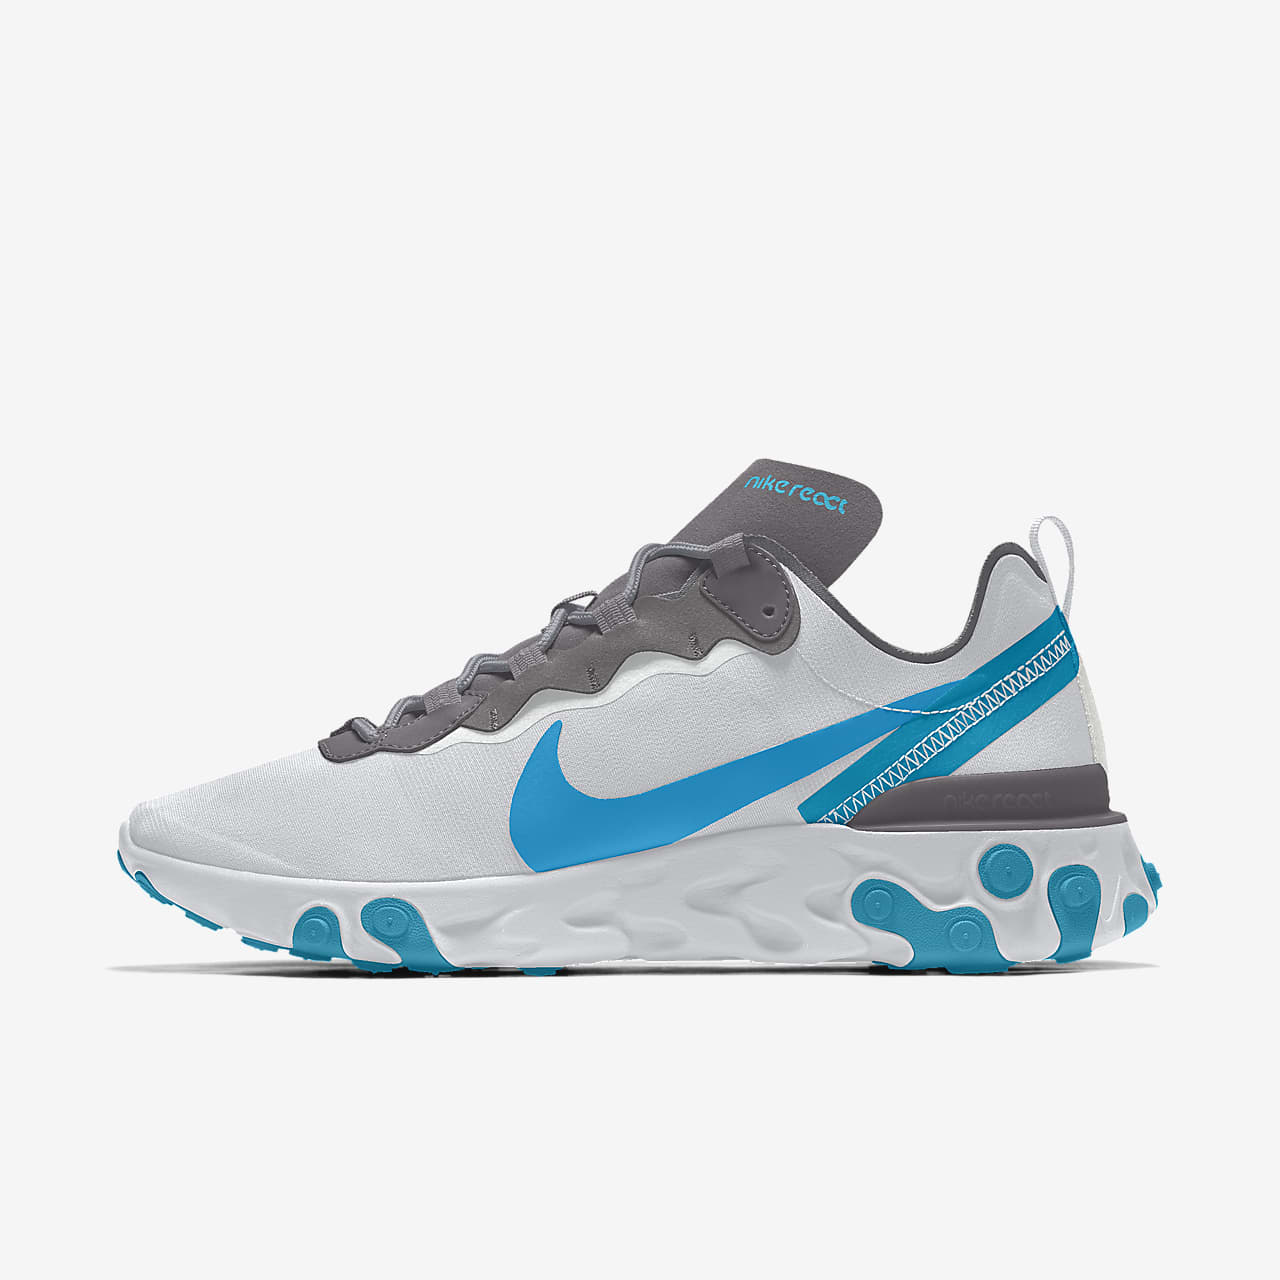 nike react element 55 about you